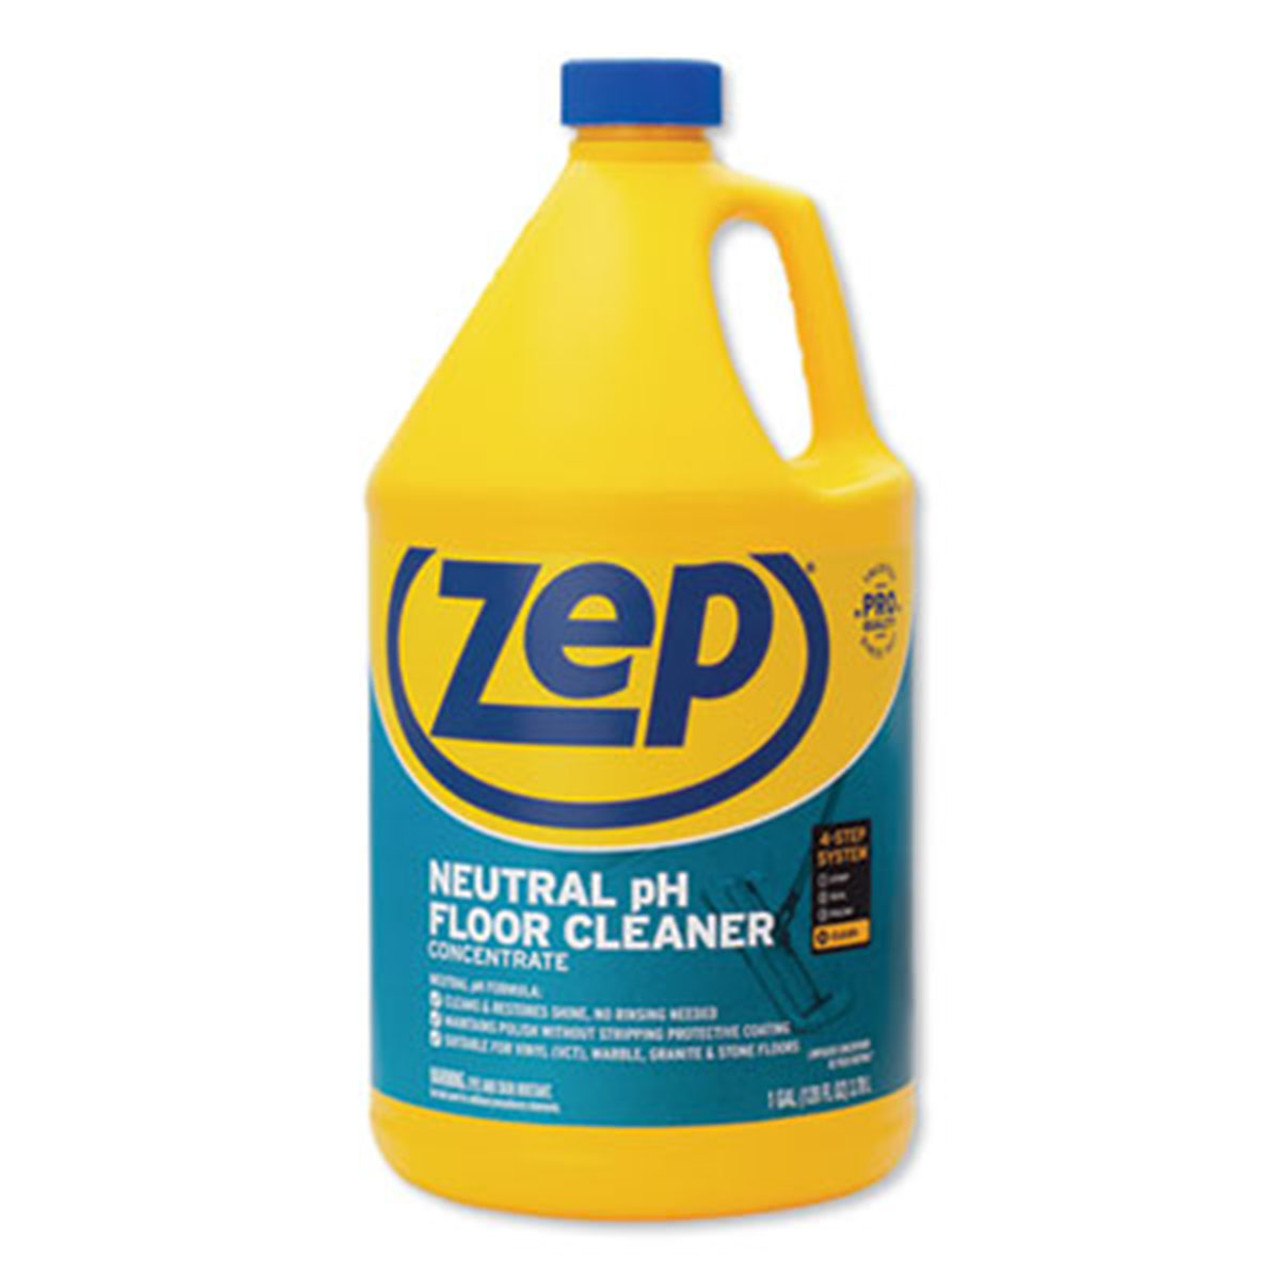 https://cdn11.bigcommerce.com/s-8mji1/images/stencil/1280x1280/products/7359/24983/zep_neutral_floor_cleaner__46960.1673280749.jpg?c=2